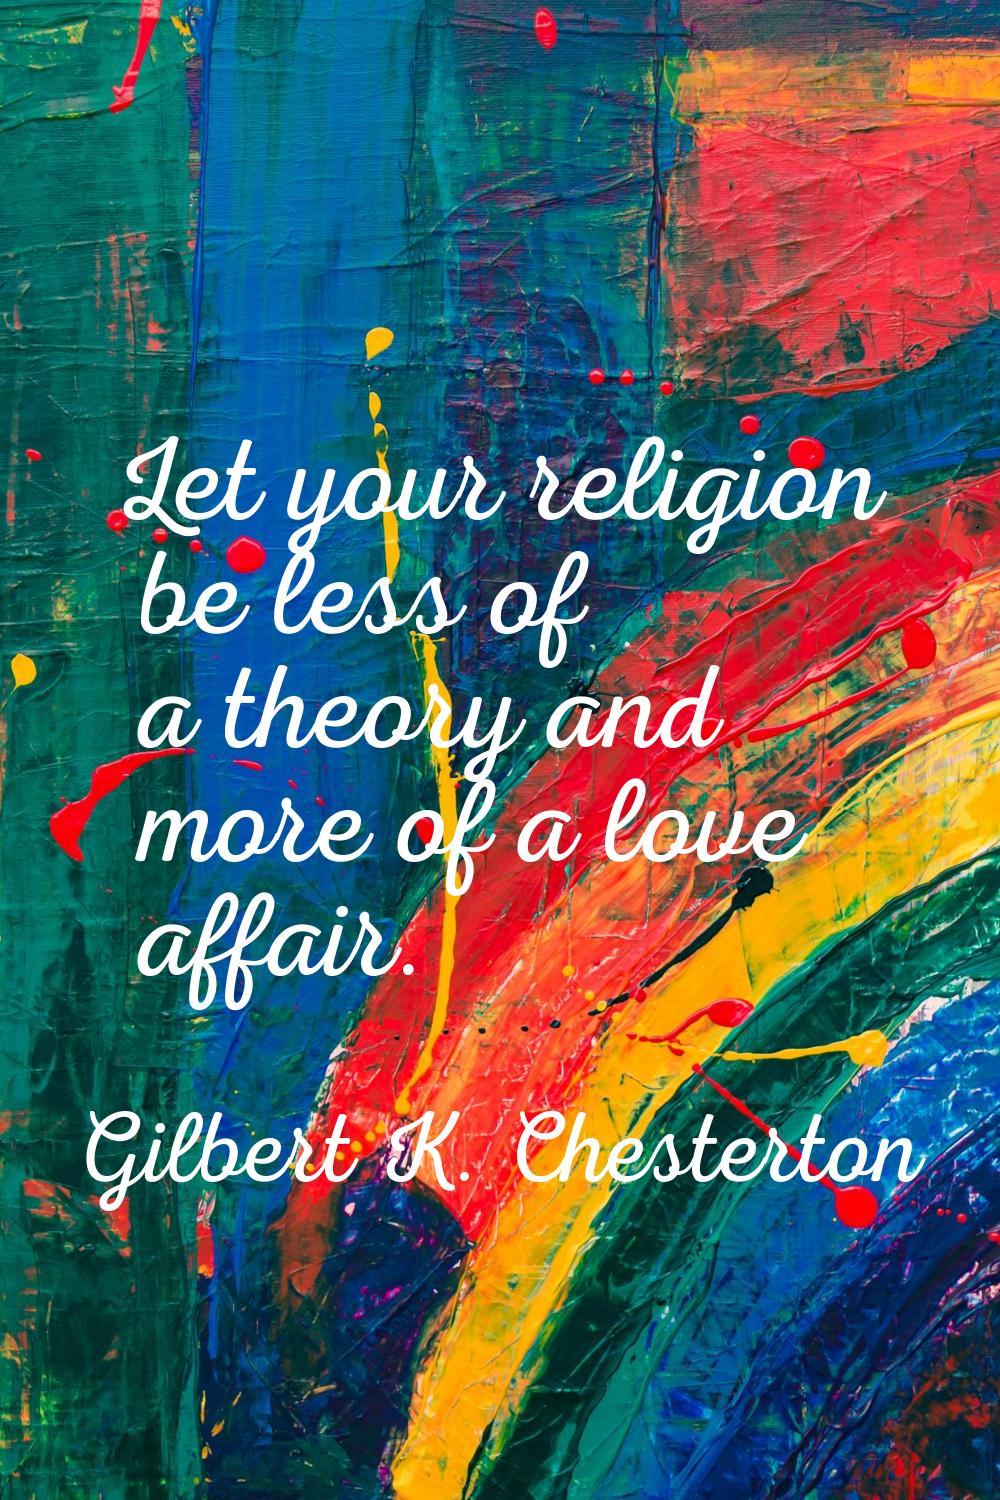 Let your religion be less of a theory and more of a love affair.